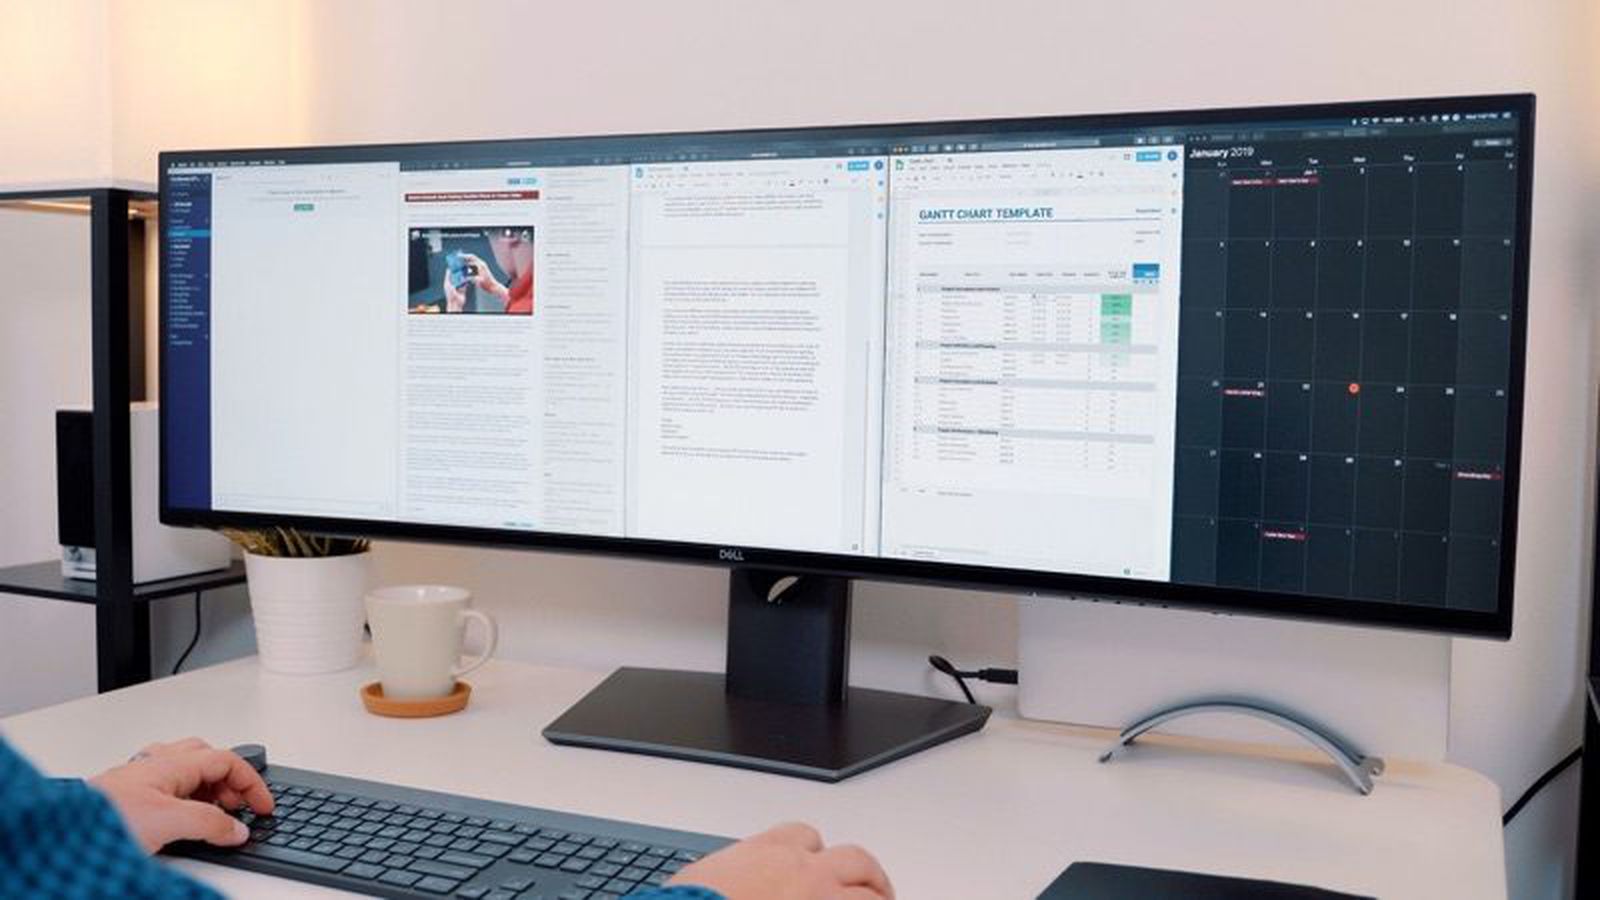 Hands-On With Dell's Massive 49-Inch 5K Ultrawide Display - MacRumors